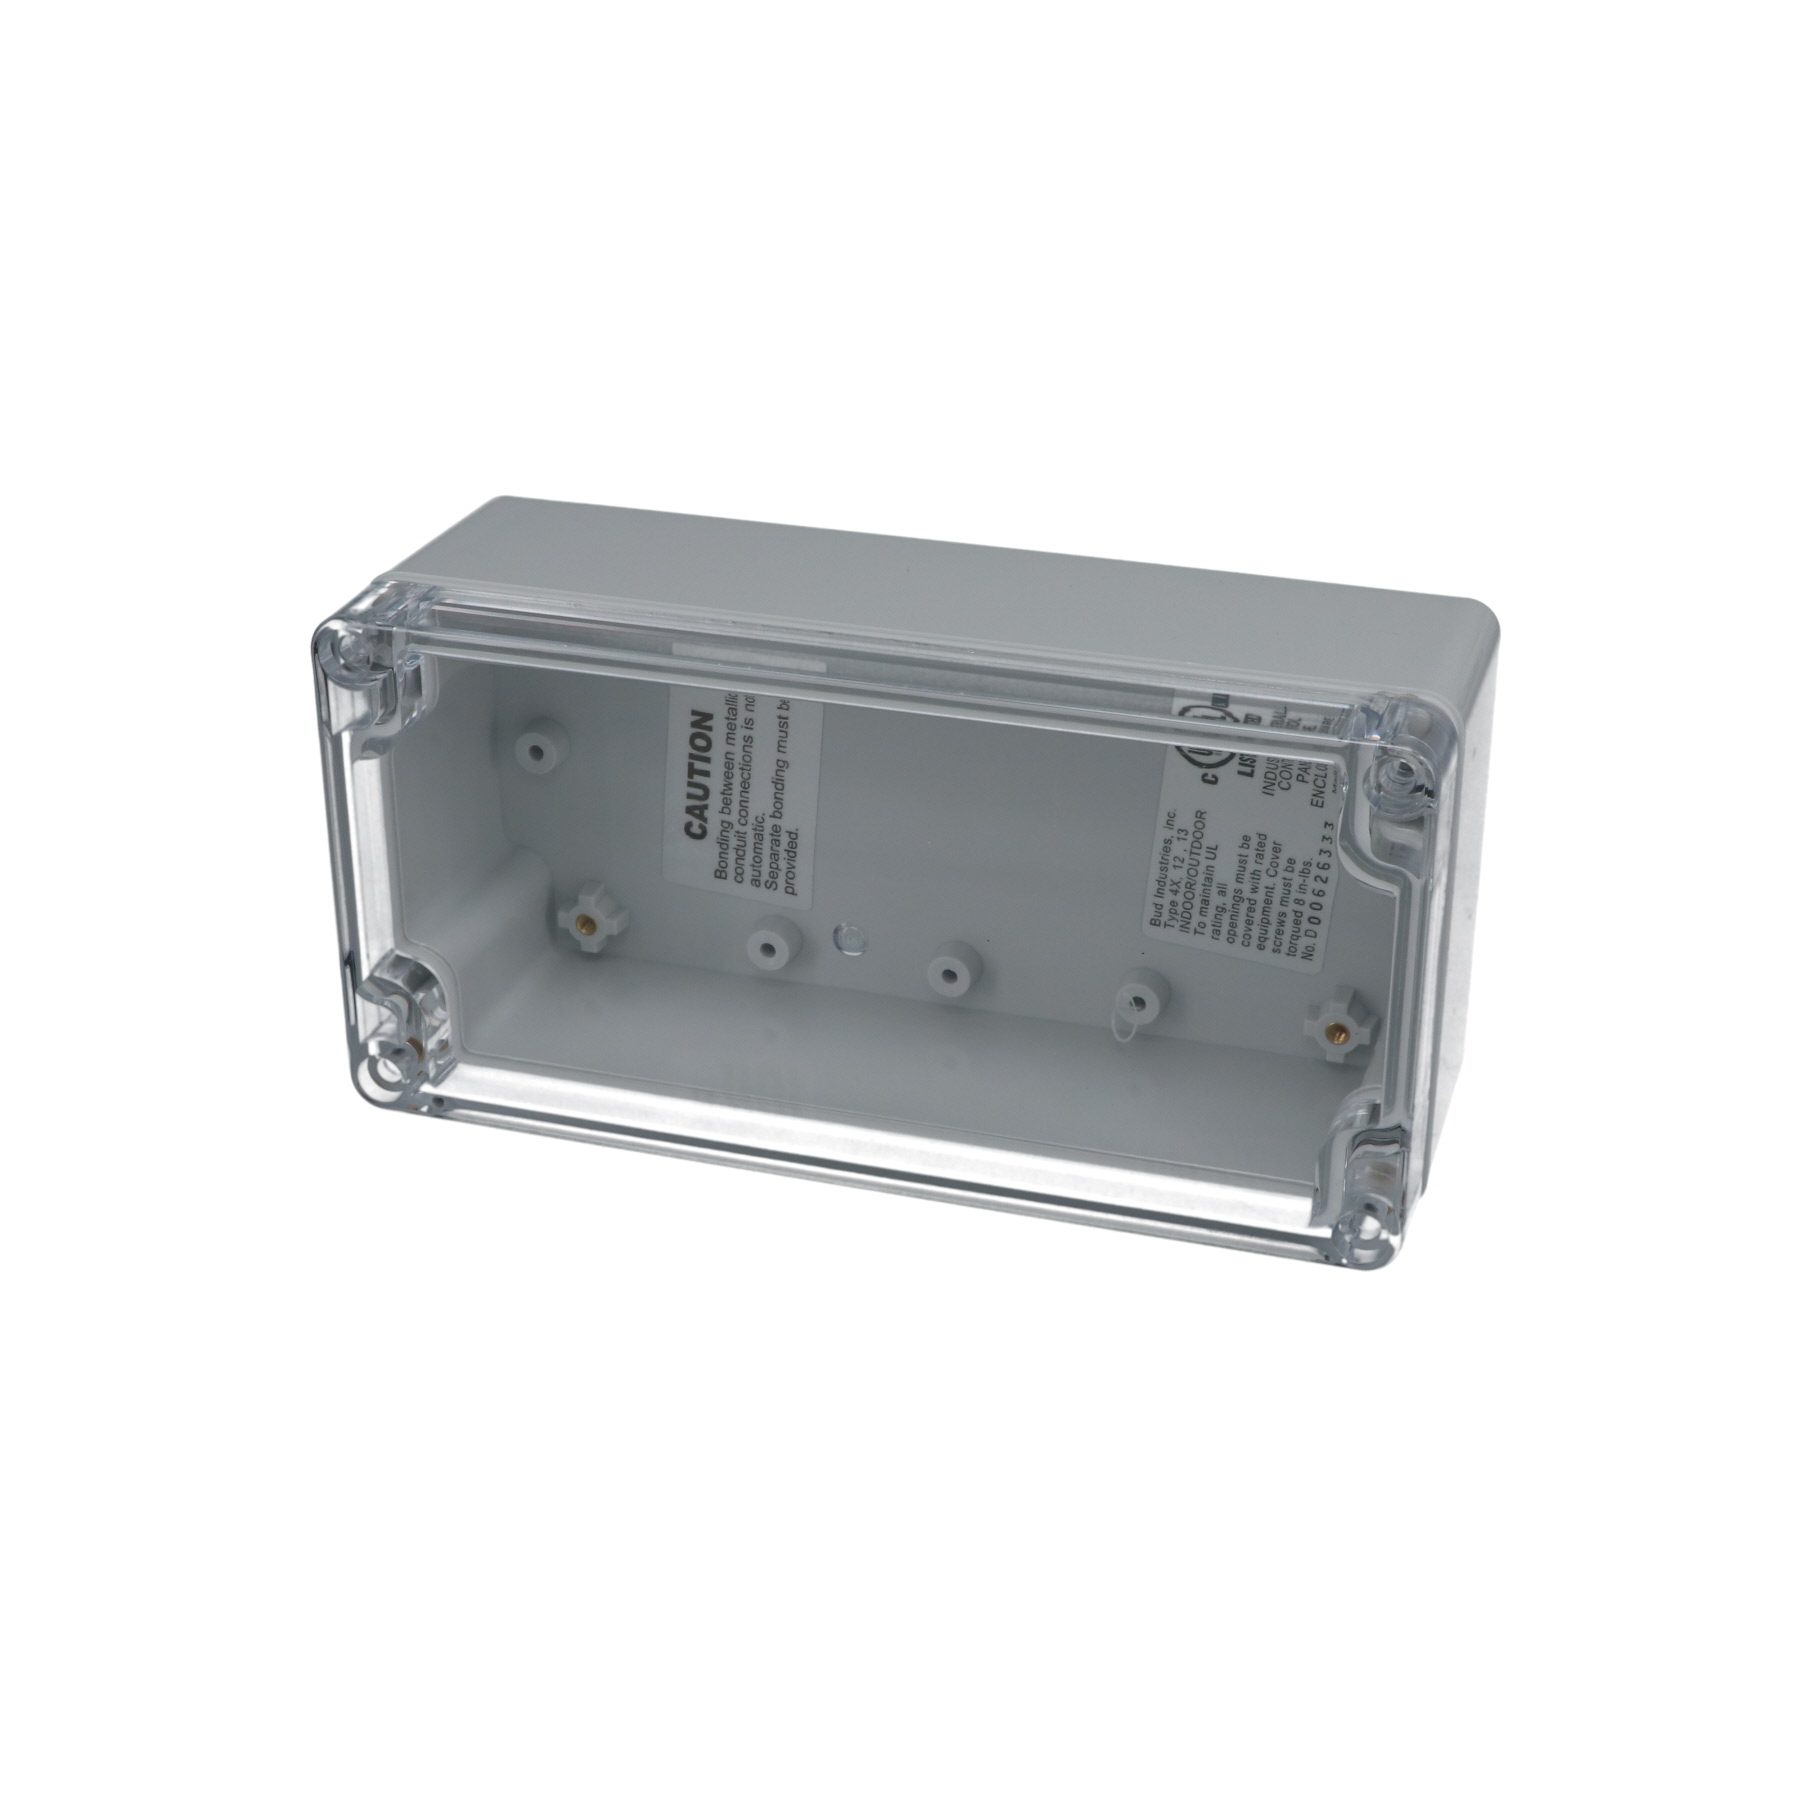 IP65 NEMA 4X Box with Clear Cover PN-1332-C